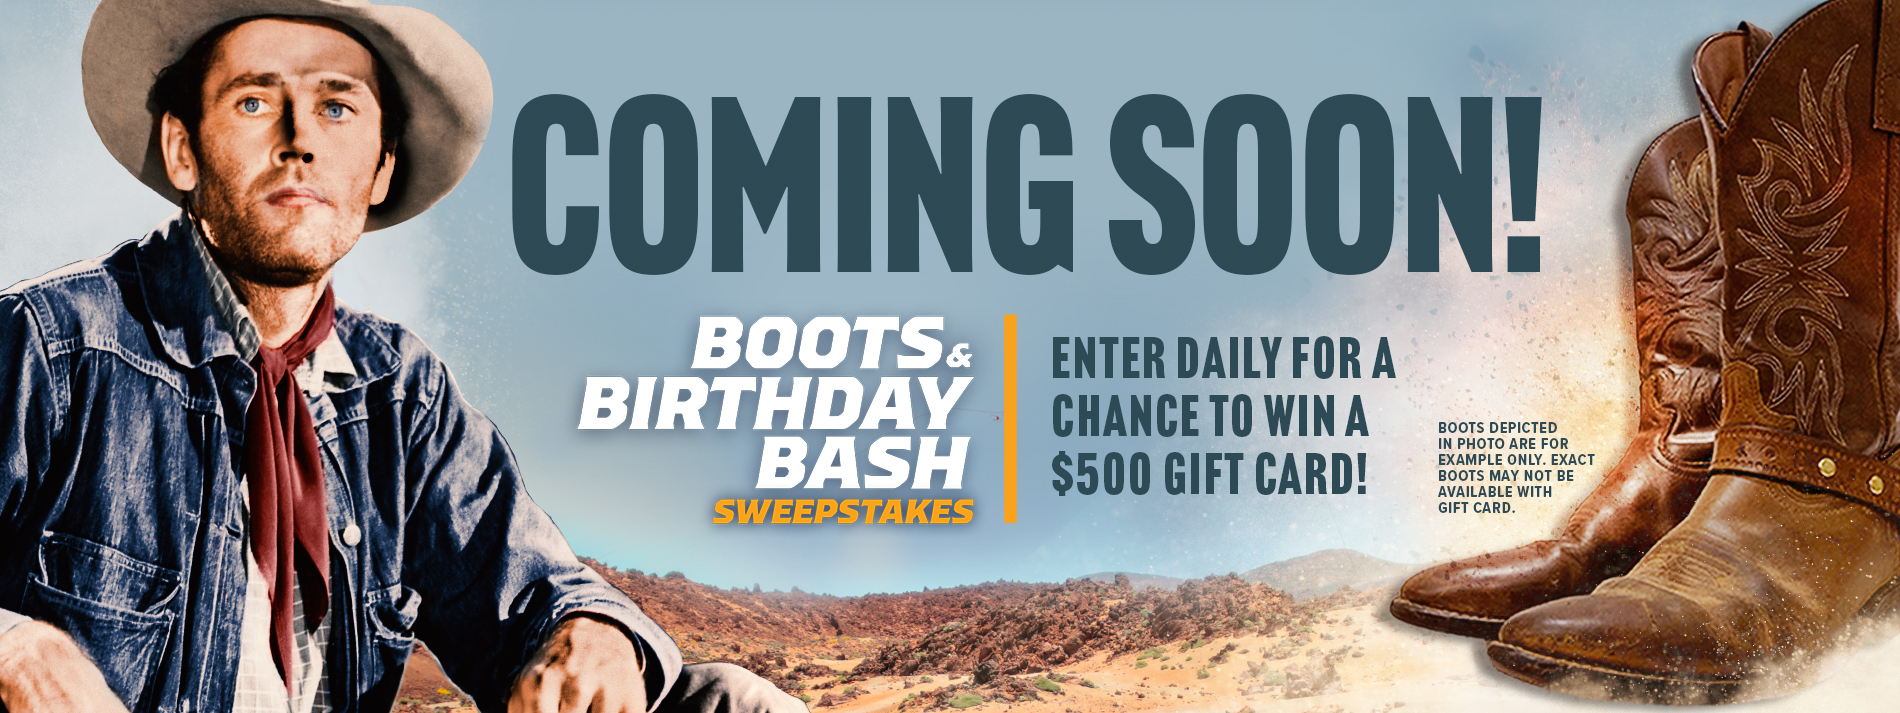 Boots & Birthday Bash Sweepstakes Coming Soon